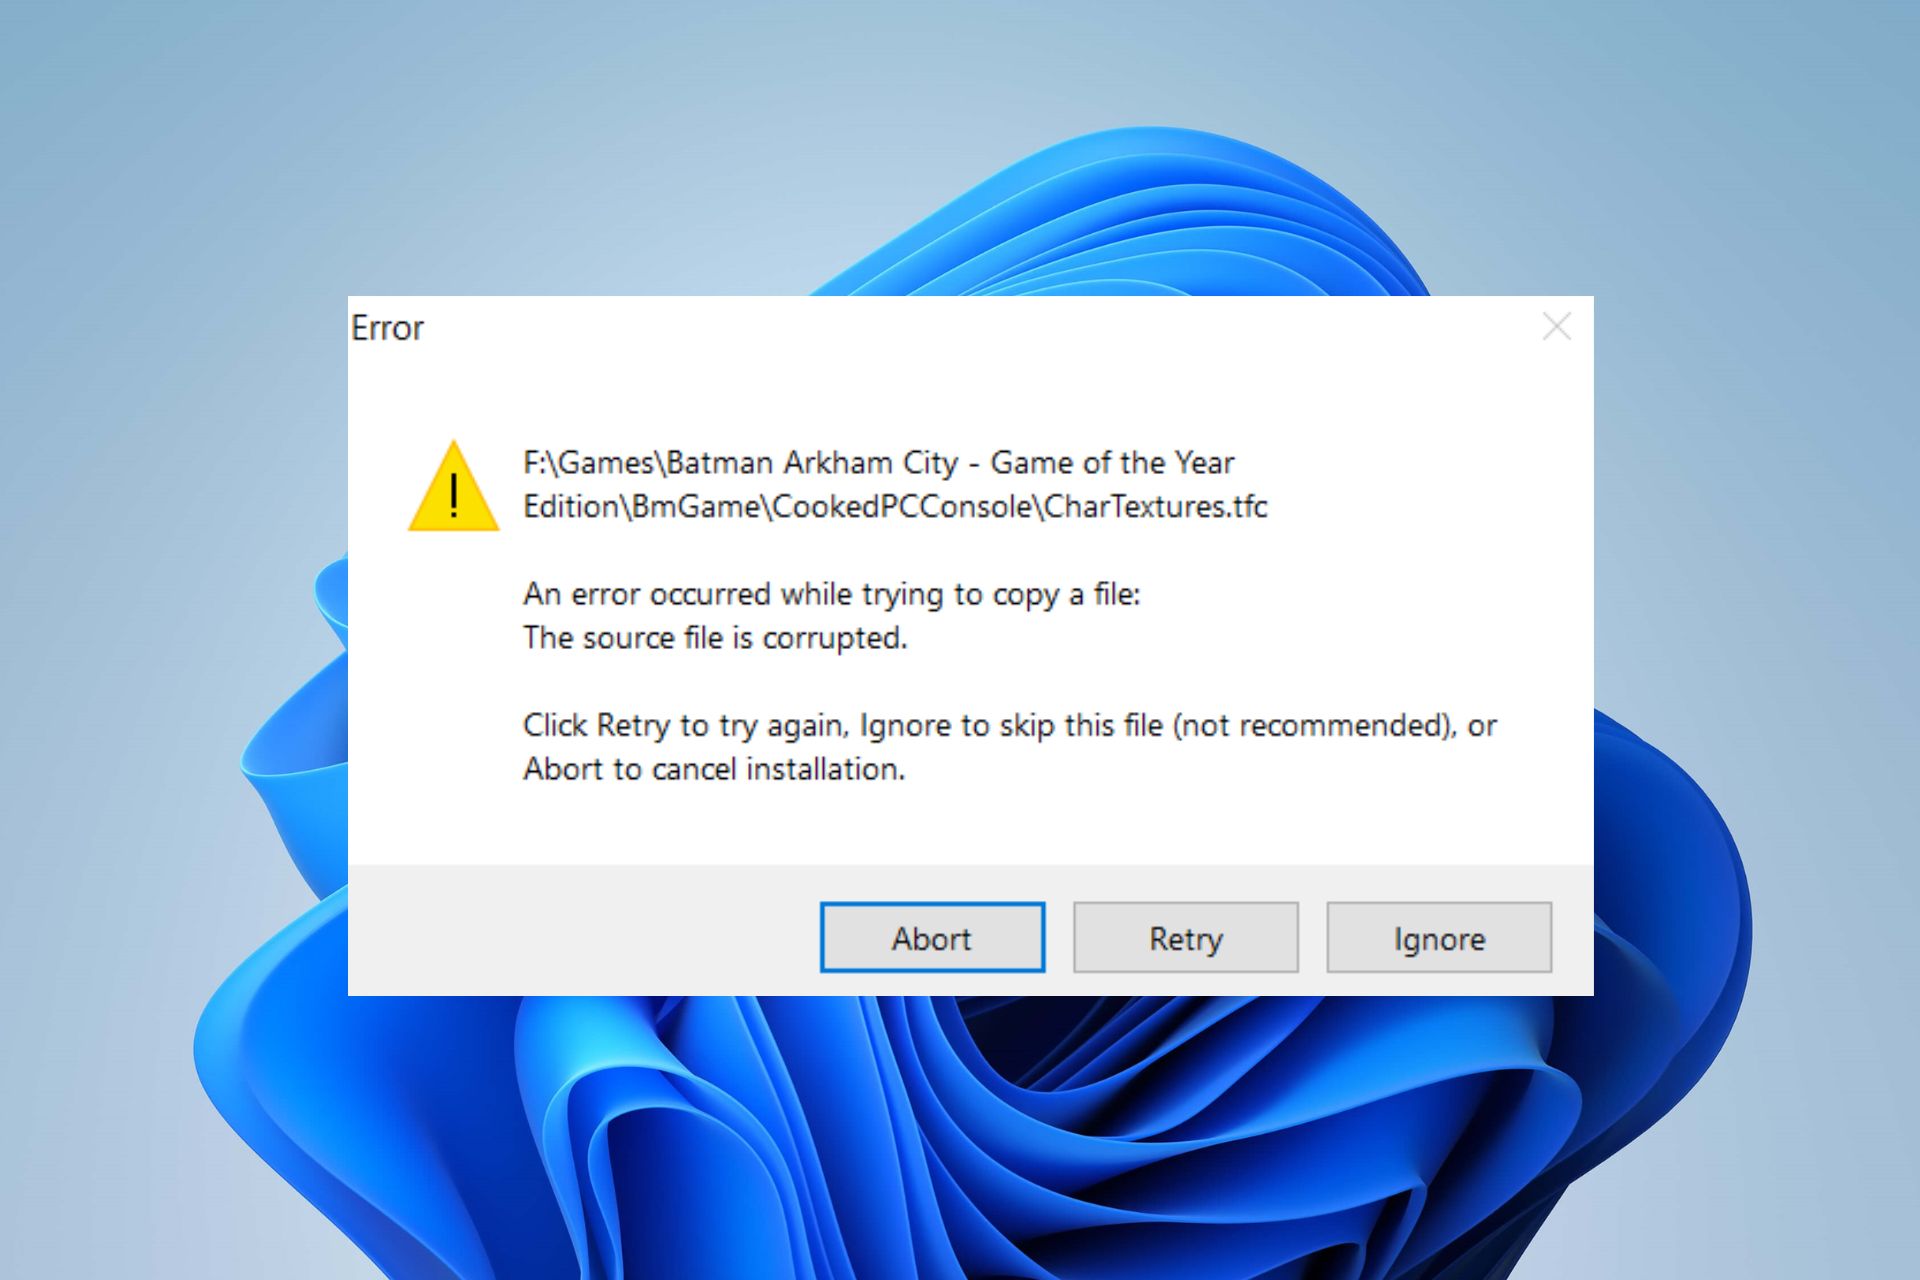 An error occurred while trying to copy a file